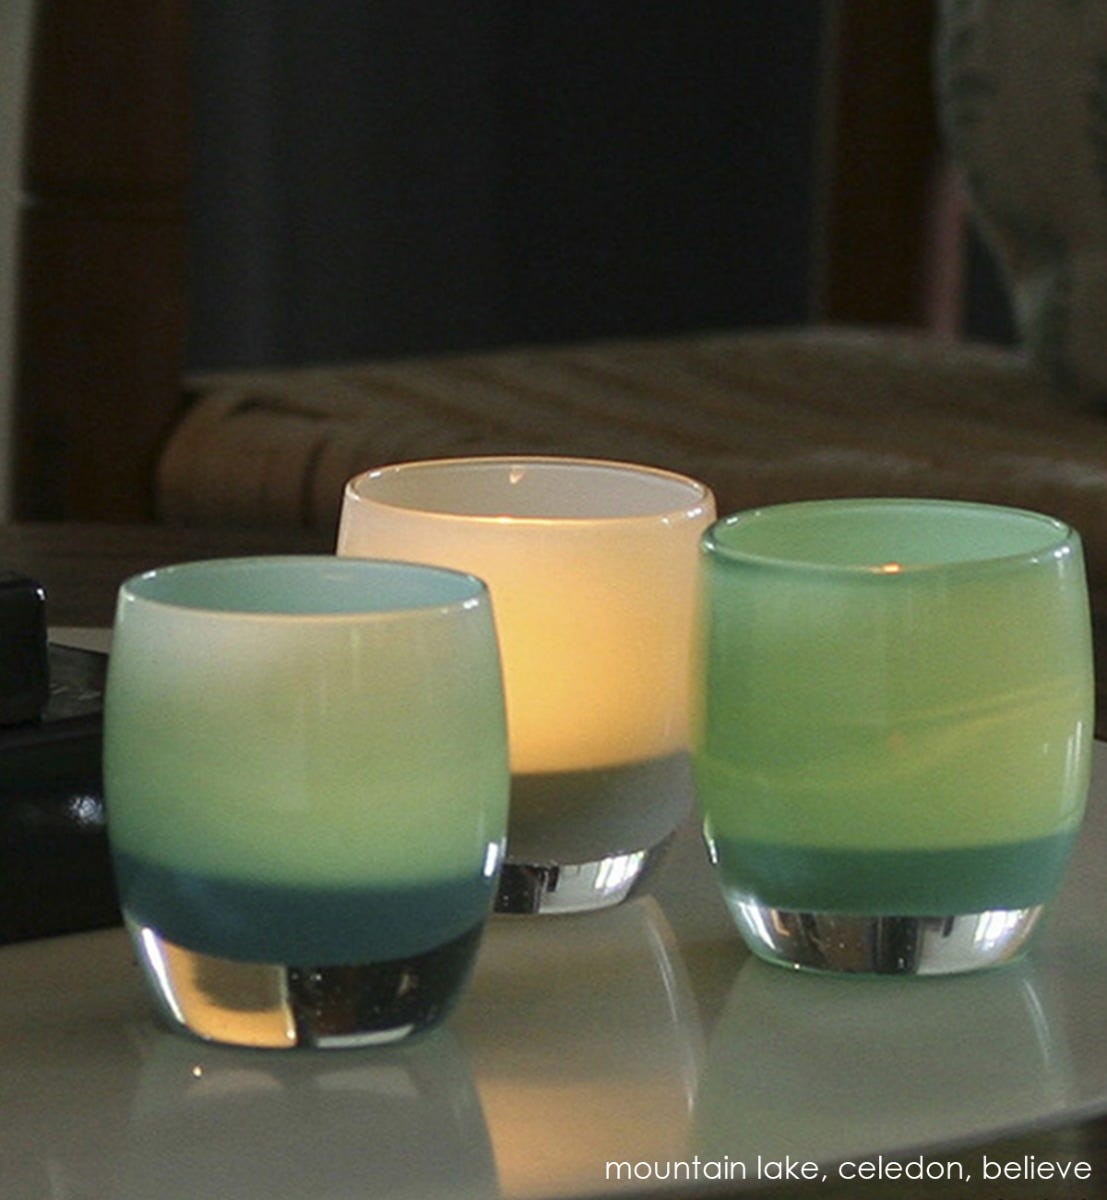 mountain lake blue hand-blown glass votive candle holder. Paired with celadon and believe.